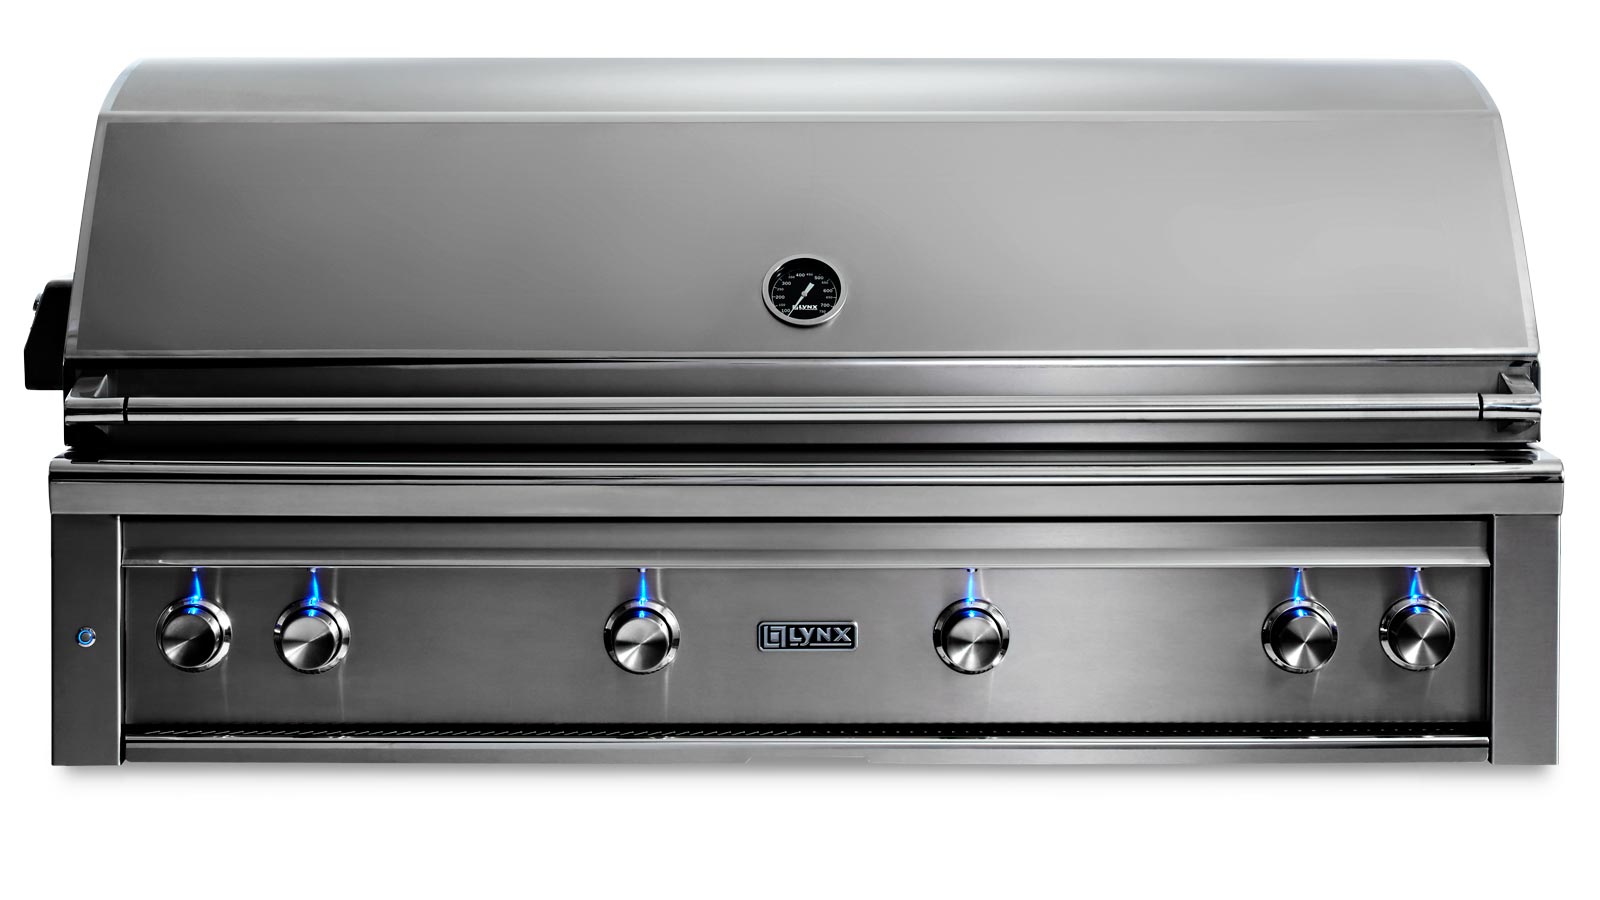 Lynx 54” Professional Built-In Grill with 1 Trident Infrared Burner and 3 Ceramic Burners and Rotisserie (L54TR)